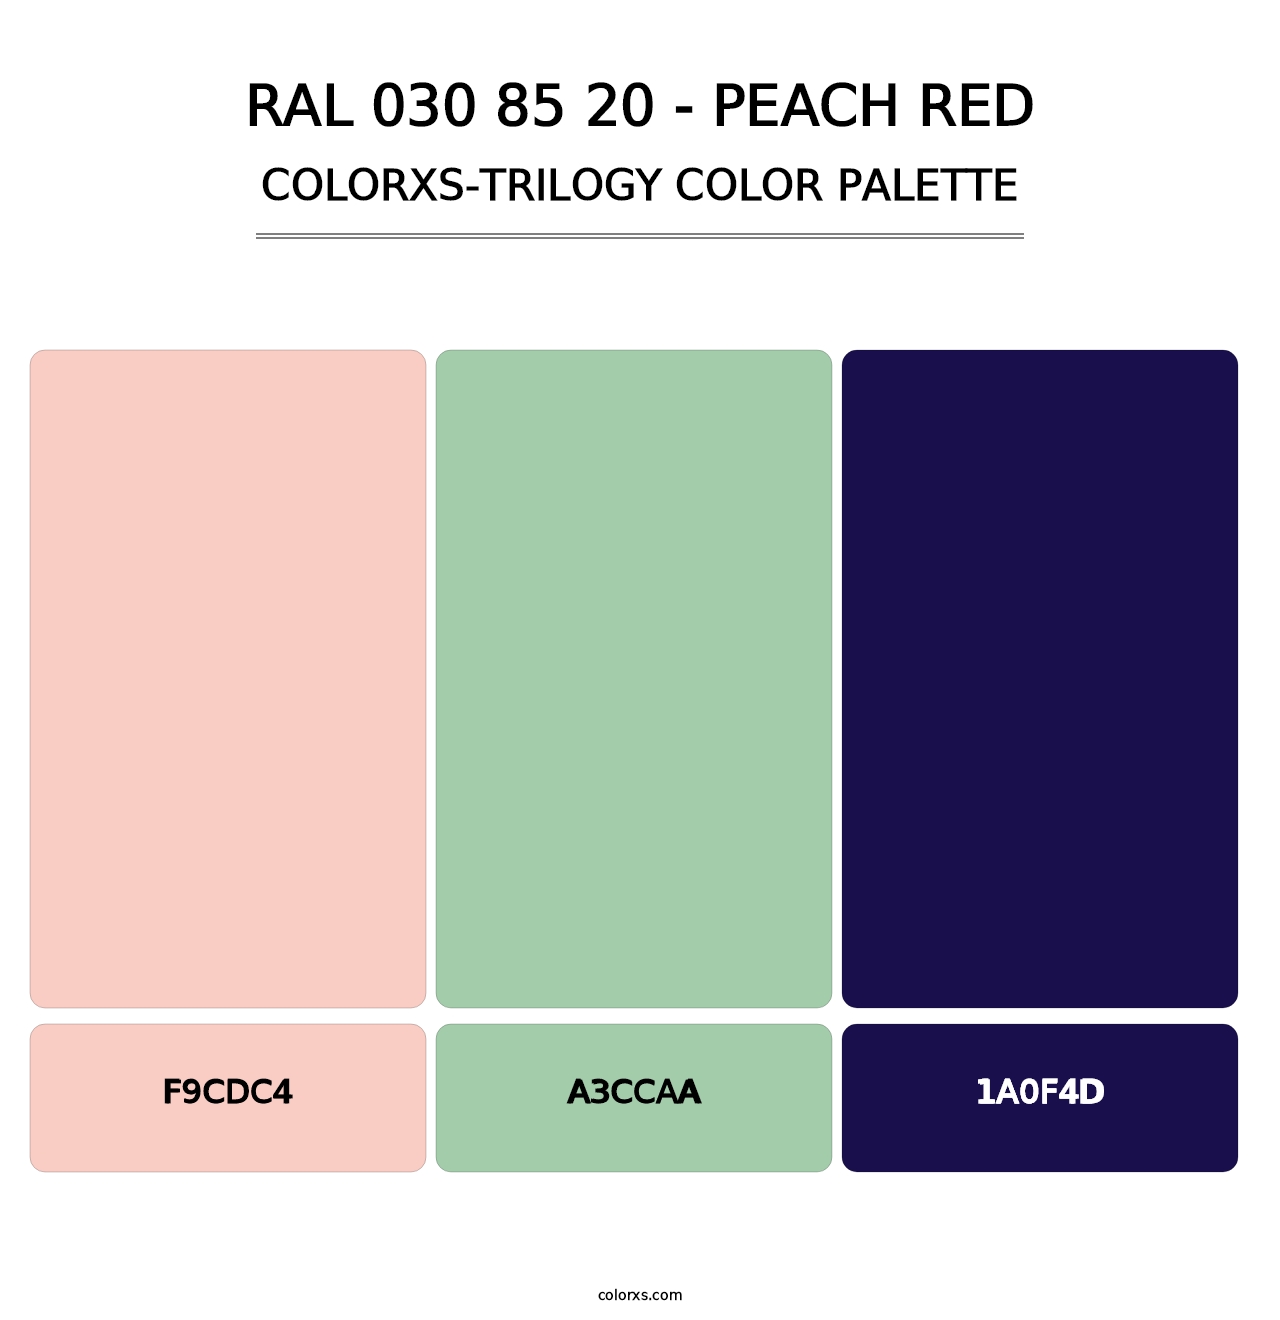 RAL 030 85 20 - Peach Red - Colorxs Trilogy Palette